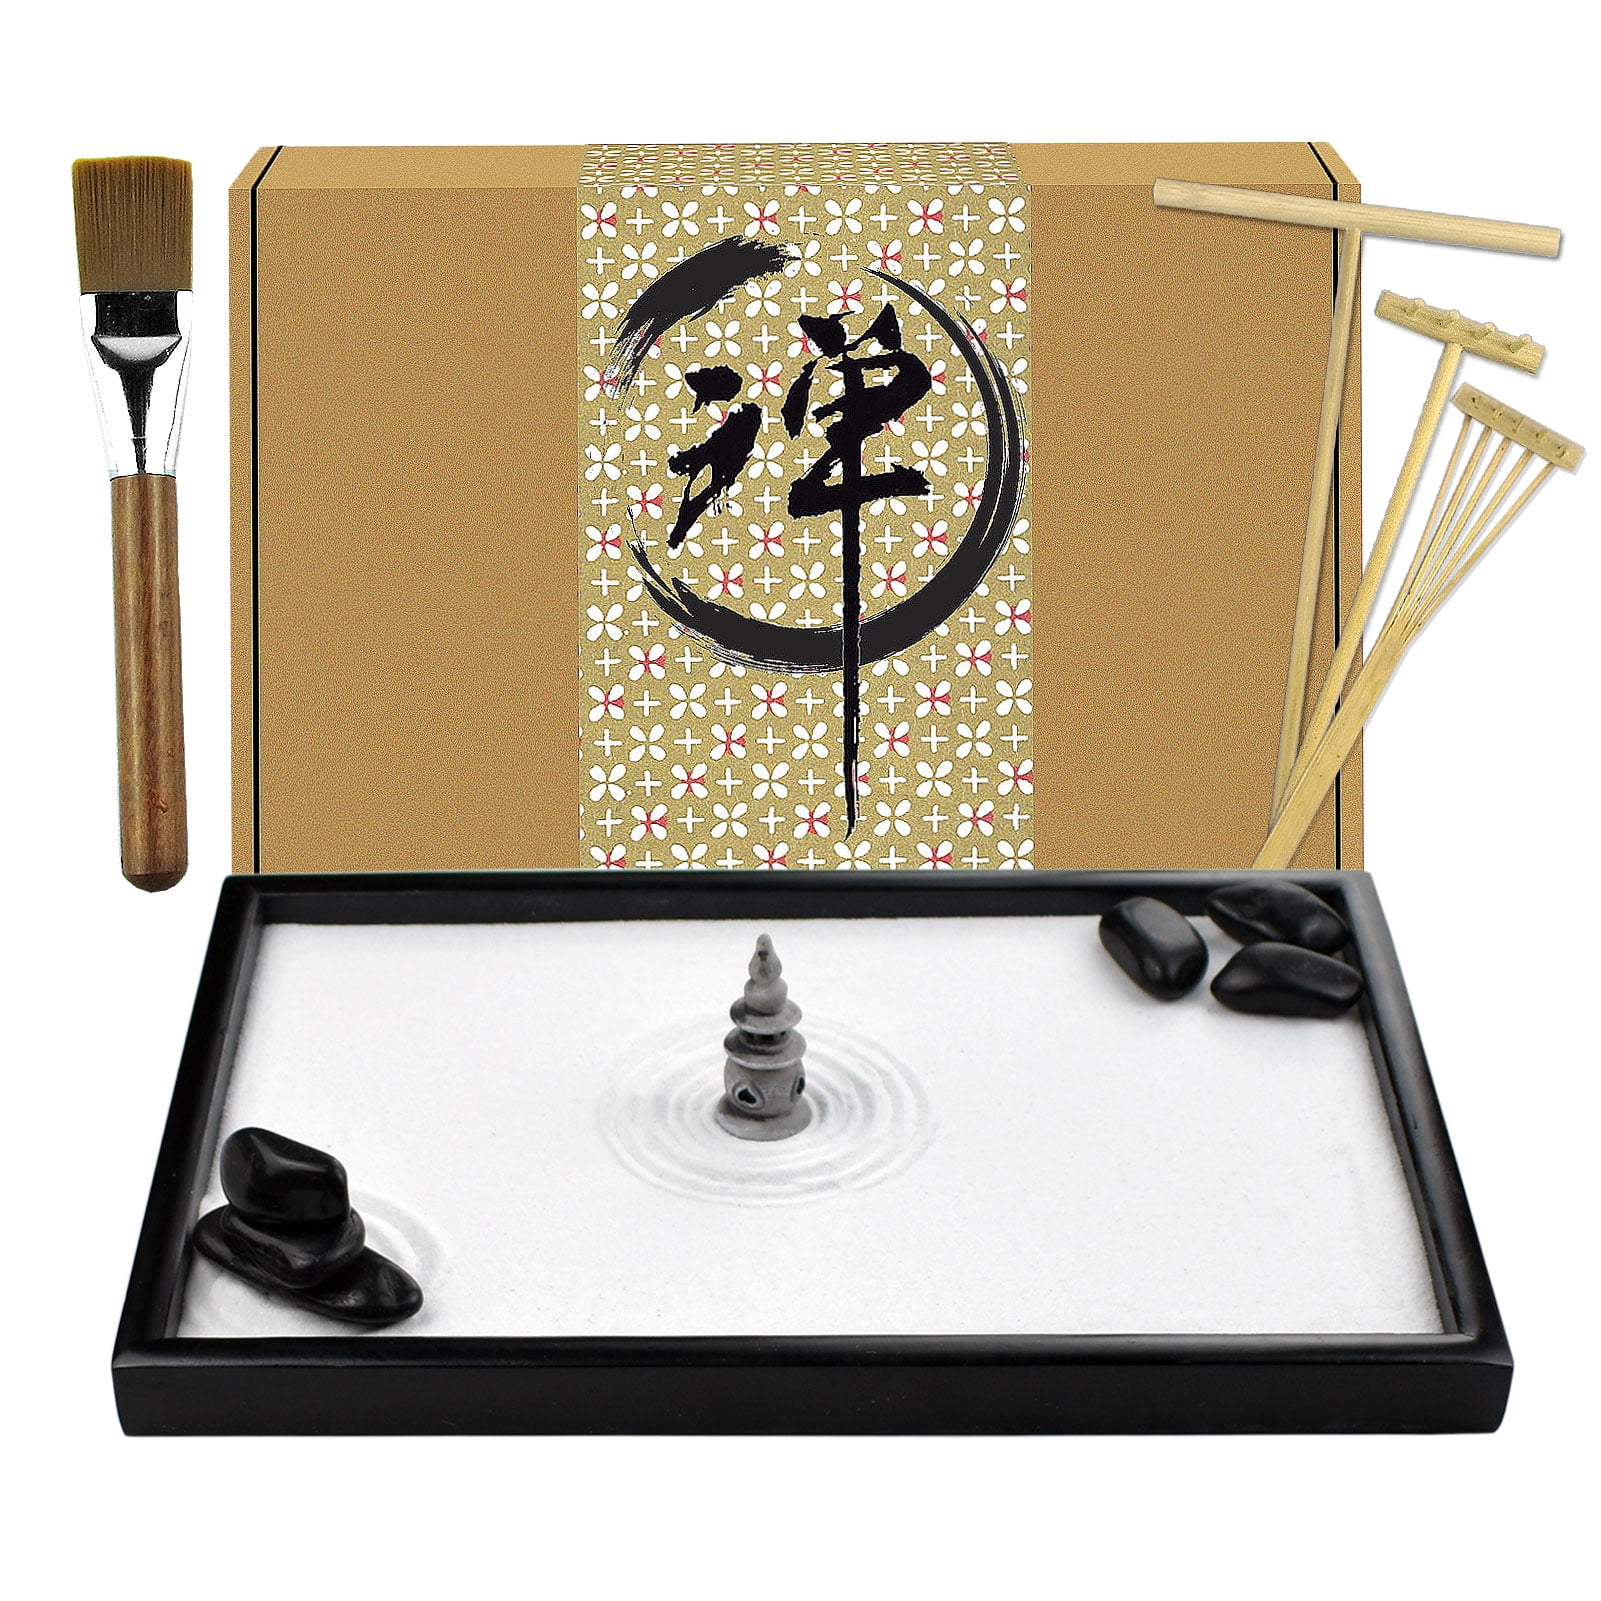 Artcome Japanese Zen Sand Garden for Desk with Rake, Stand, Rocks and ...